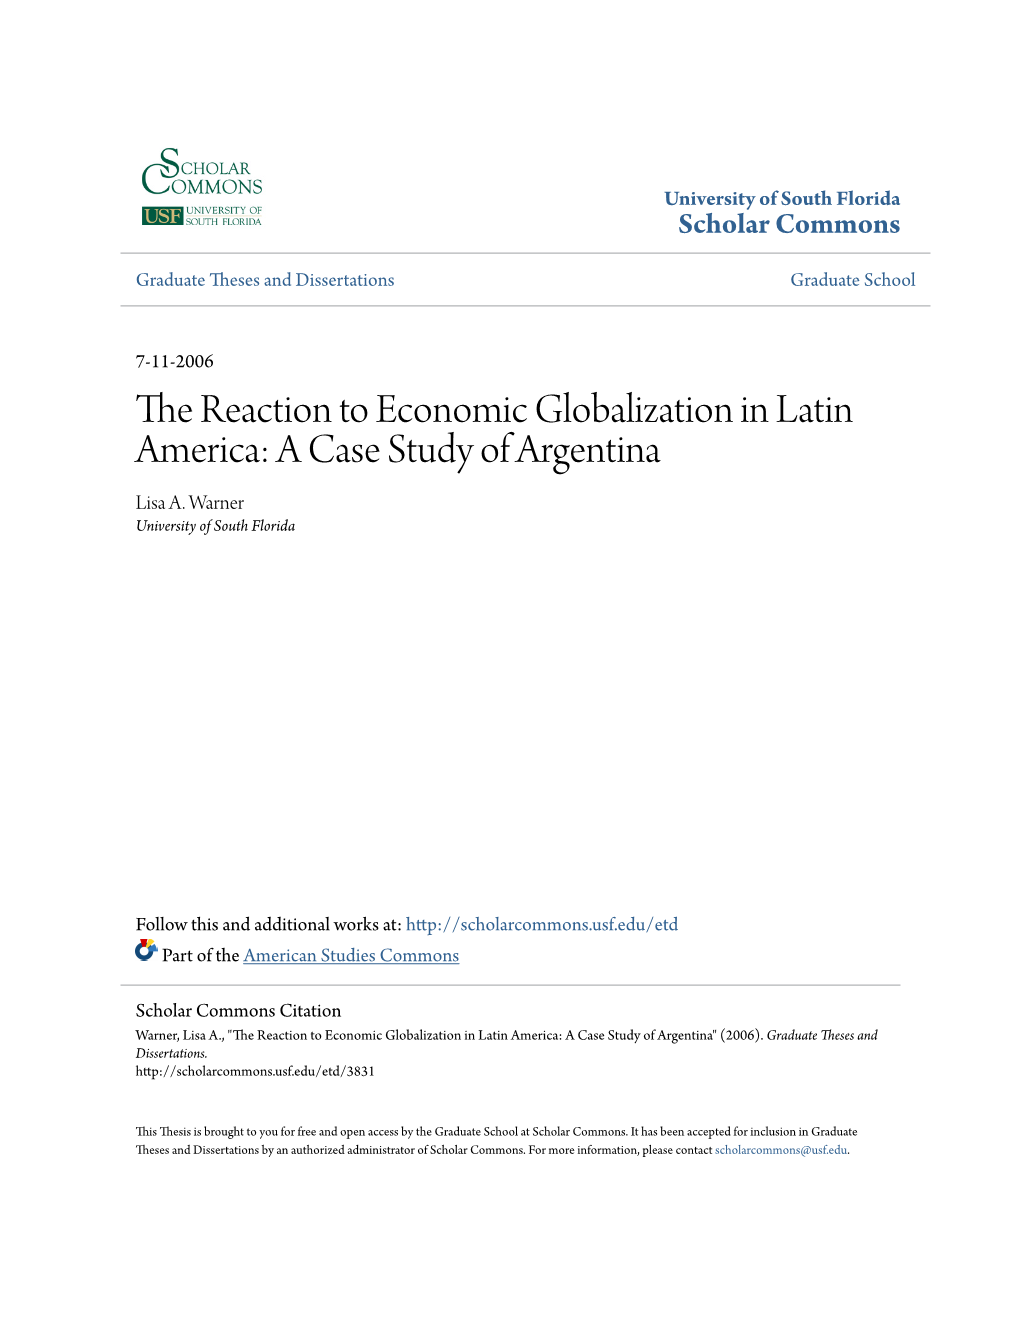 The Reaction to Economic Globalization in Latin America: a Case Study of Argentina Lisa A